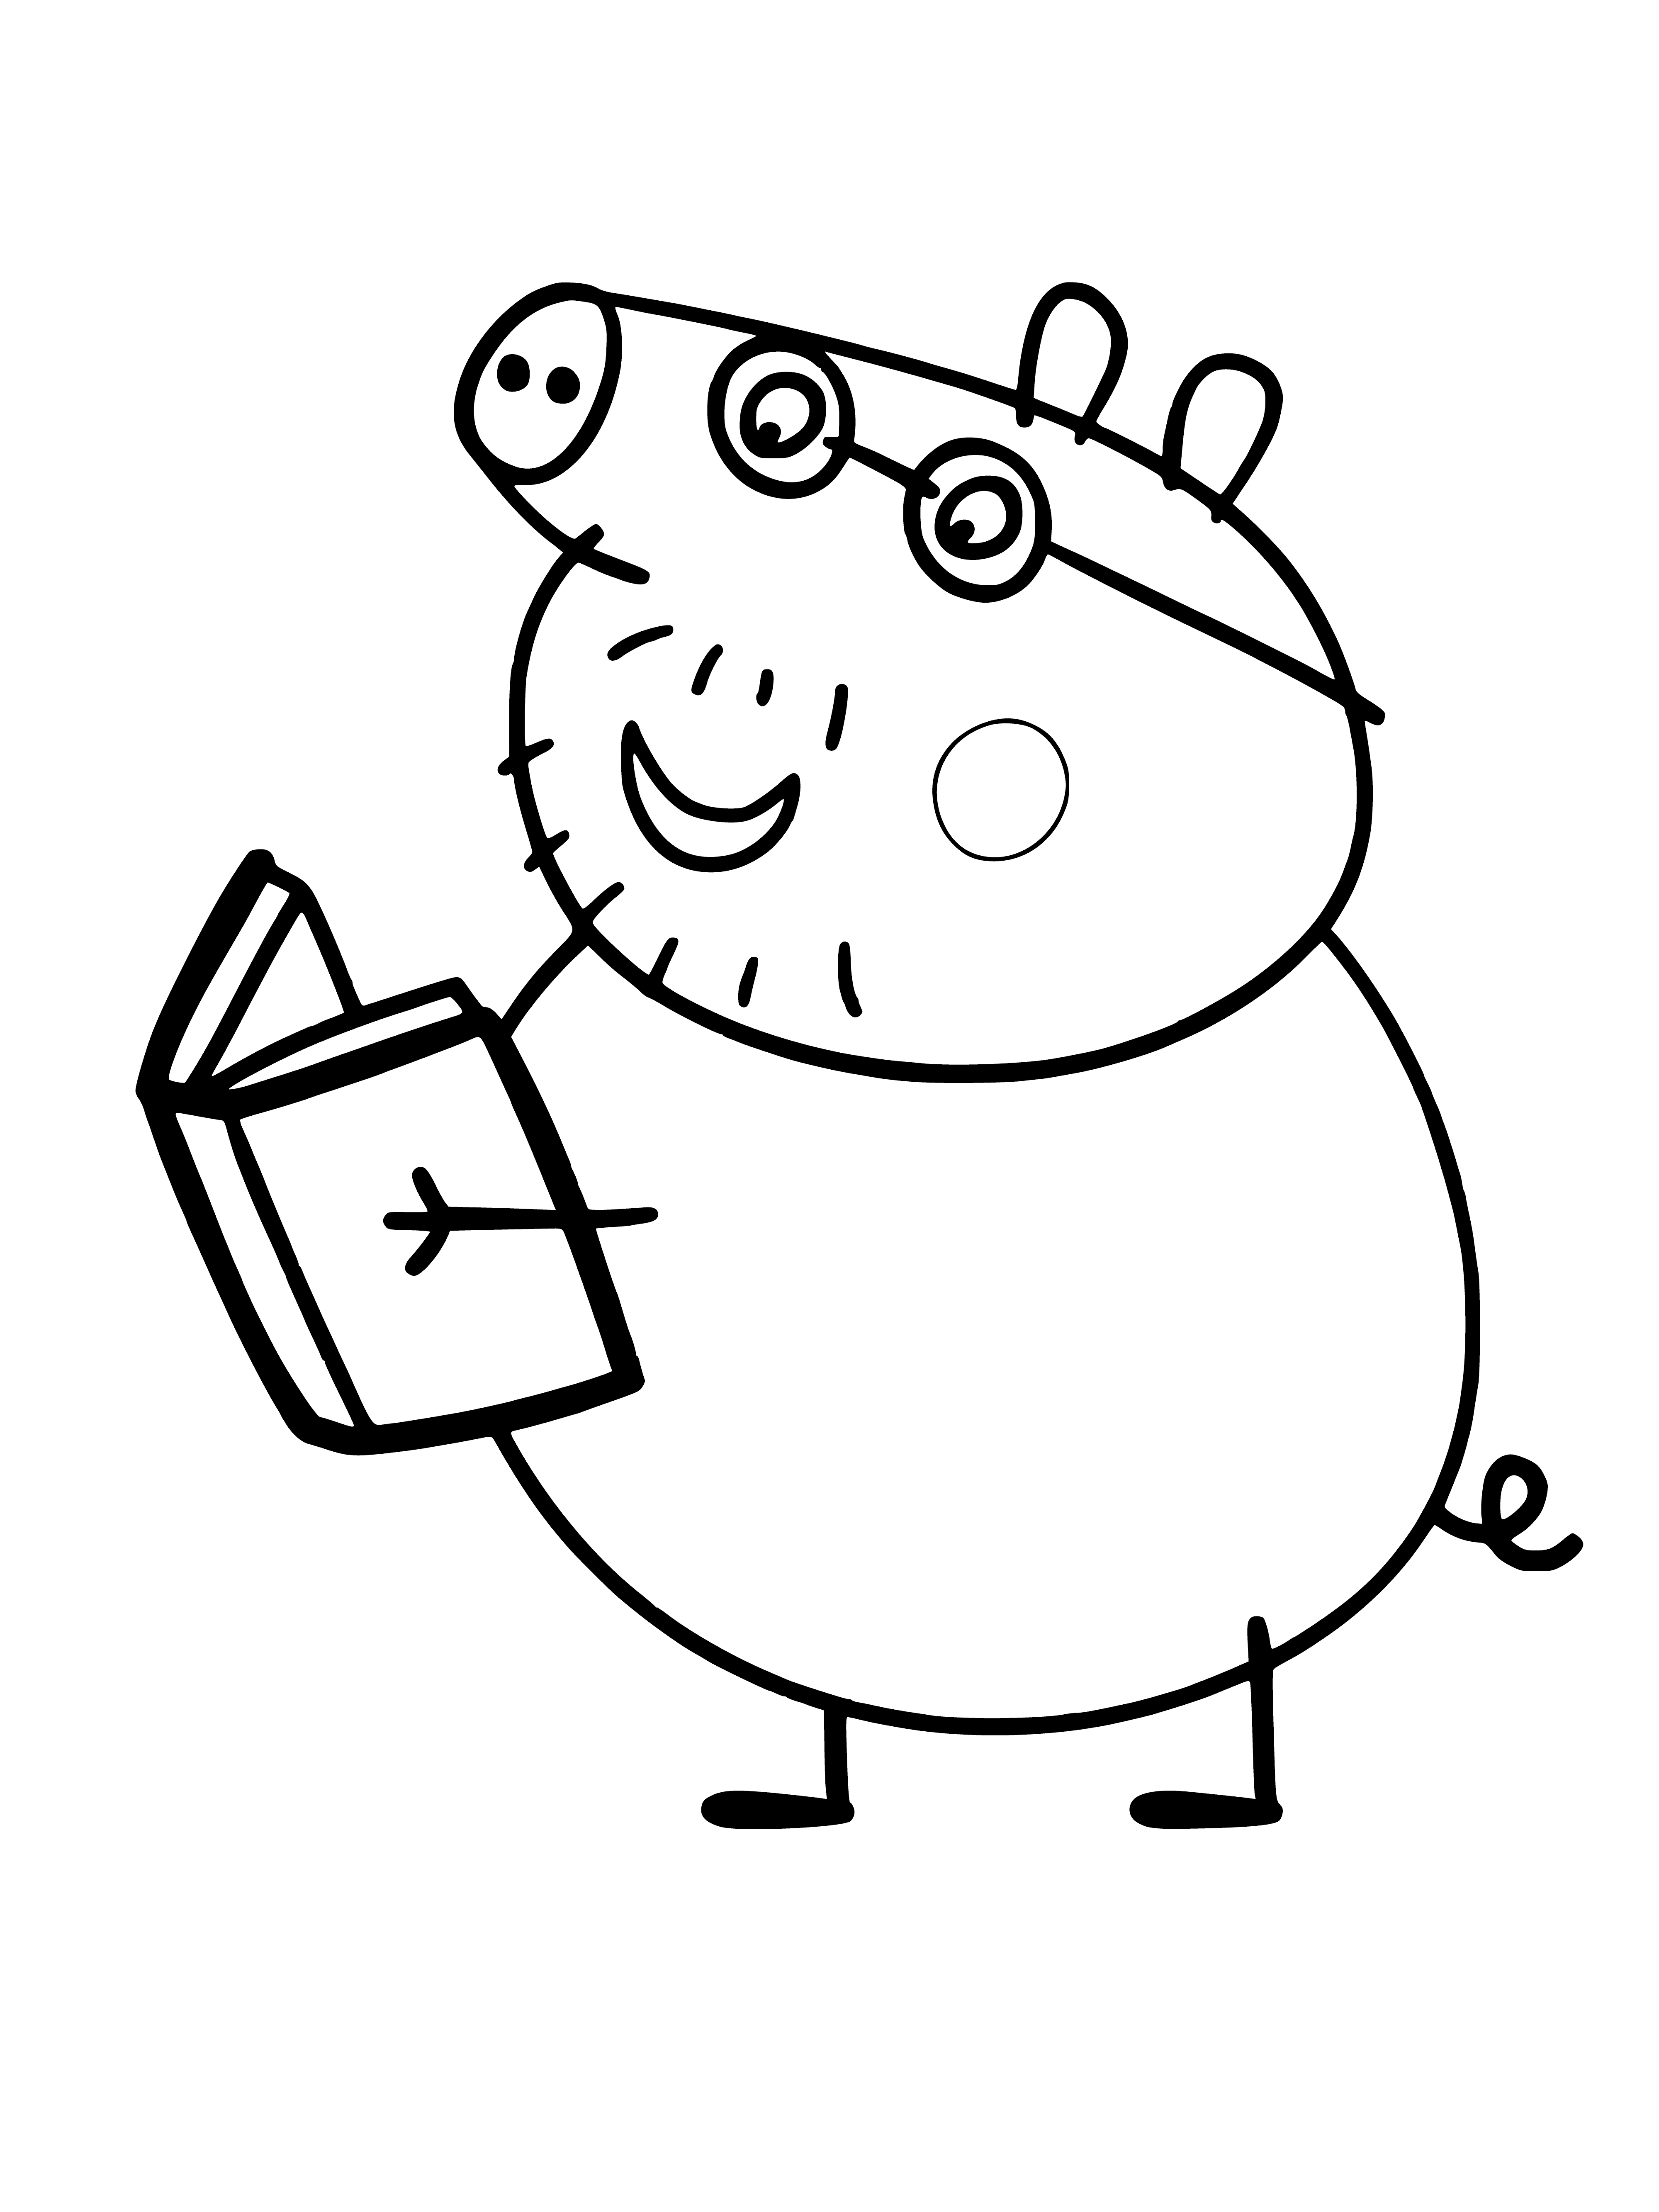 Daddy pig reading a book coloring page